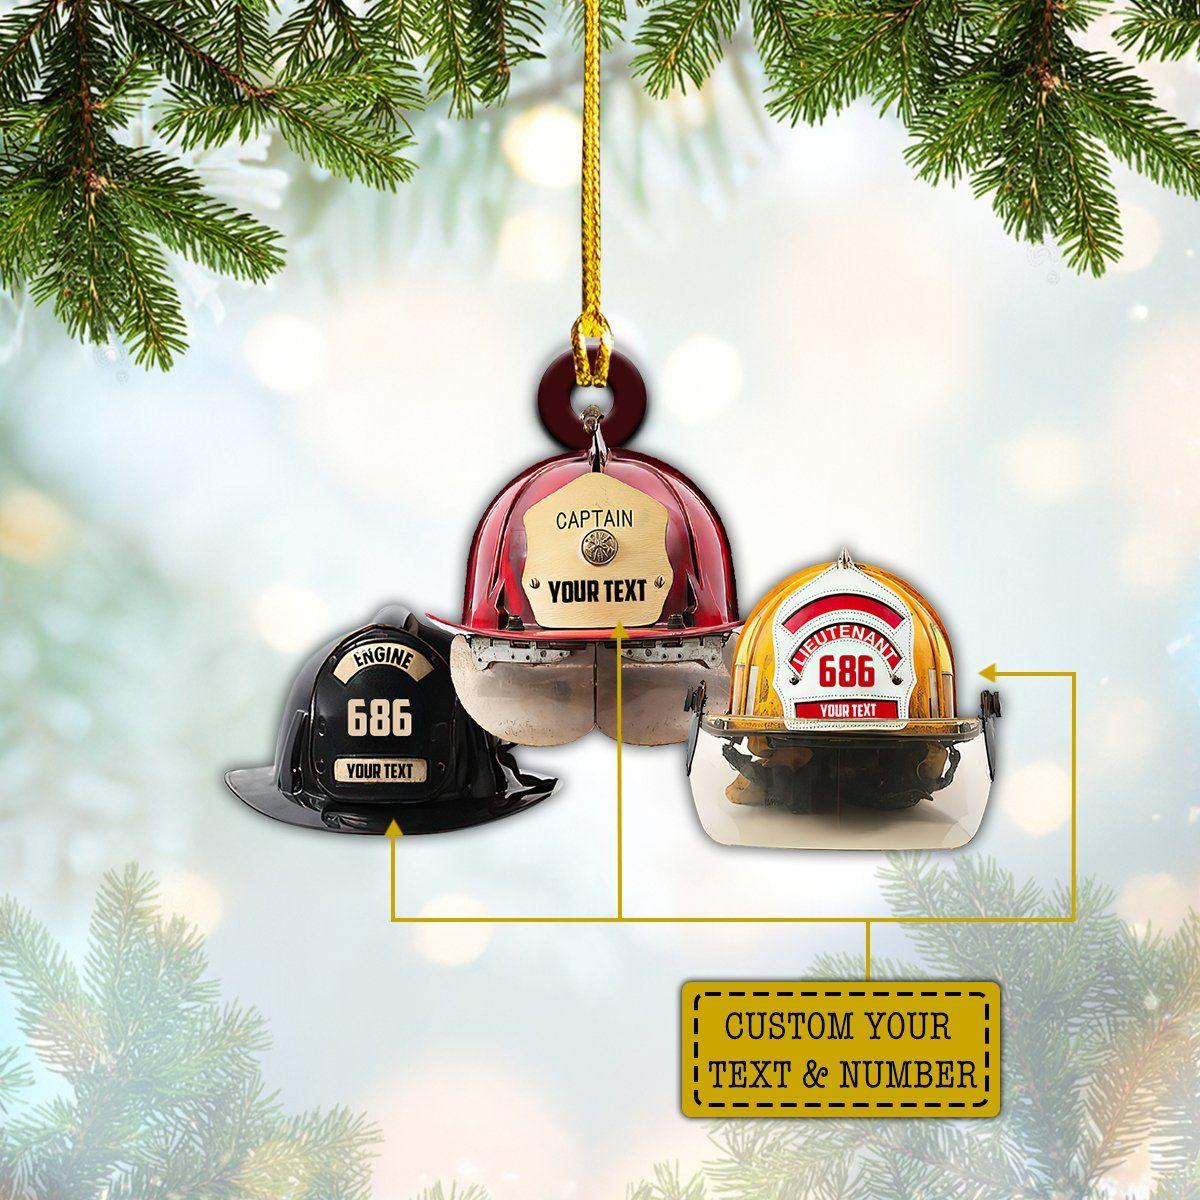 giftngon - Personalized Firefighter Helmet Rank Christmas Ornament | Custom Name & Number New